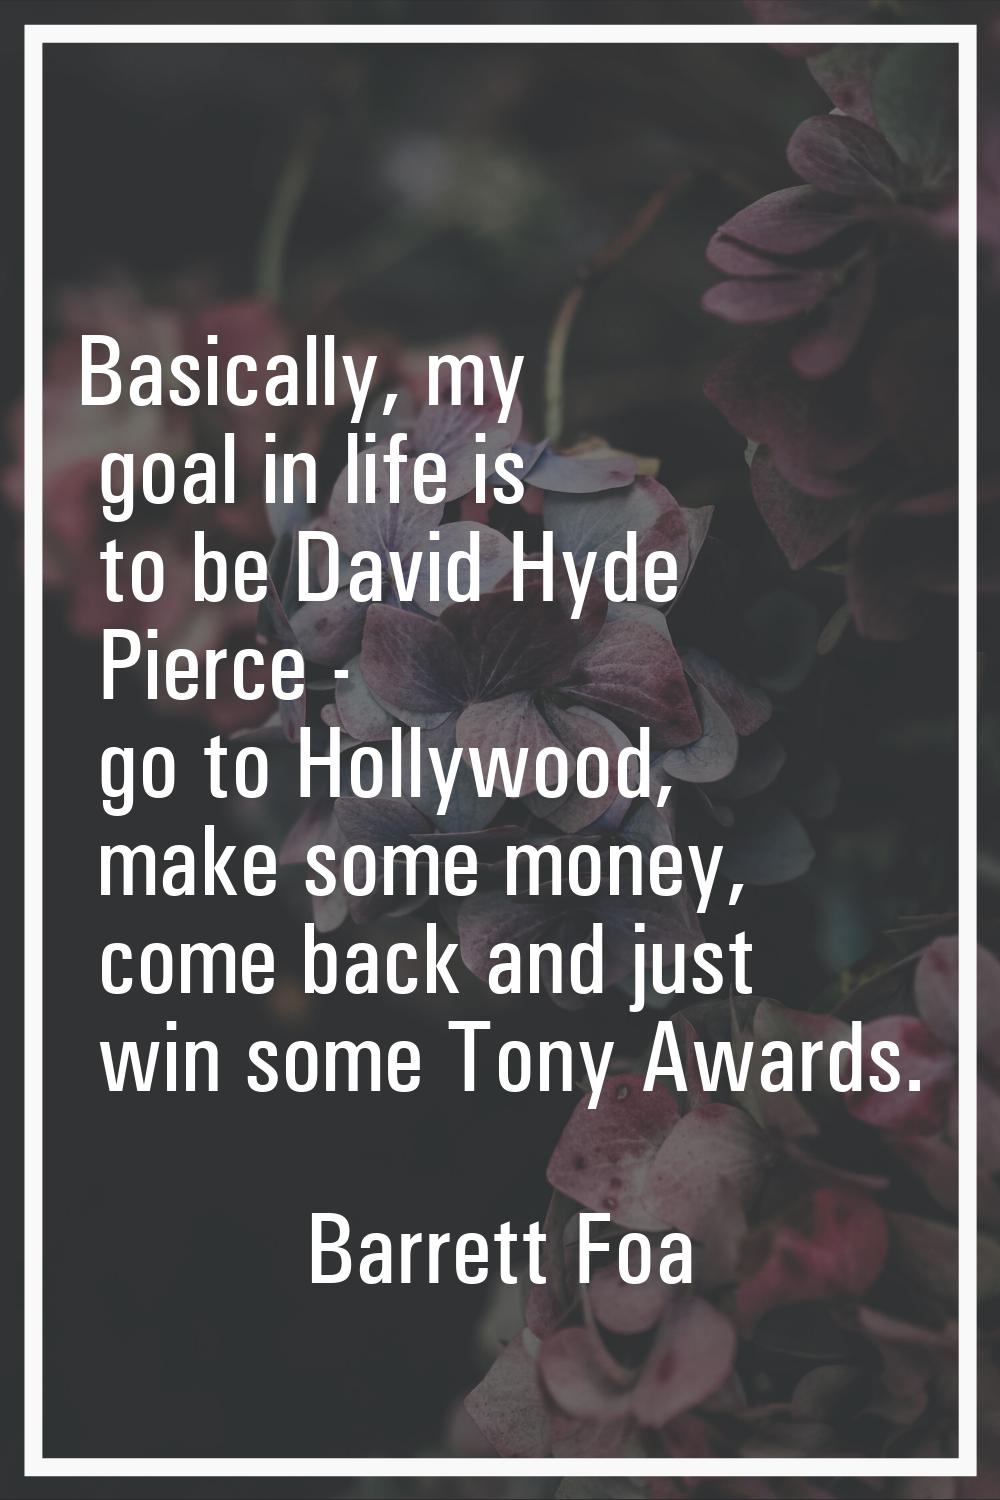 Basically, my goal in life is to be David Hyde Pierce - go to Hollywood, make some money, come back